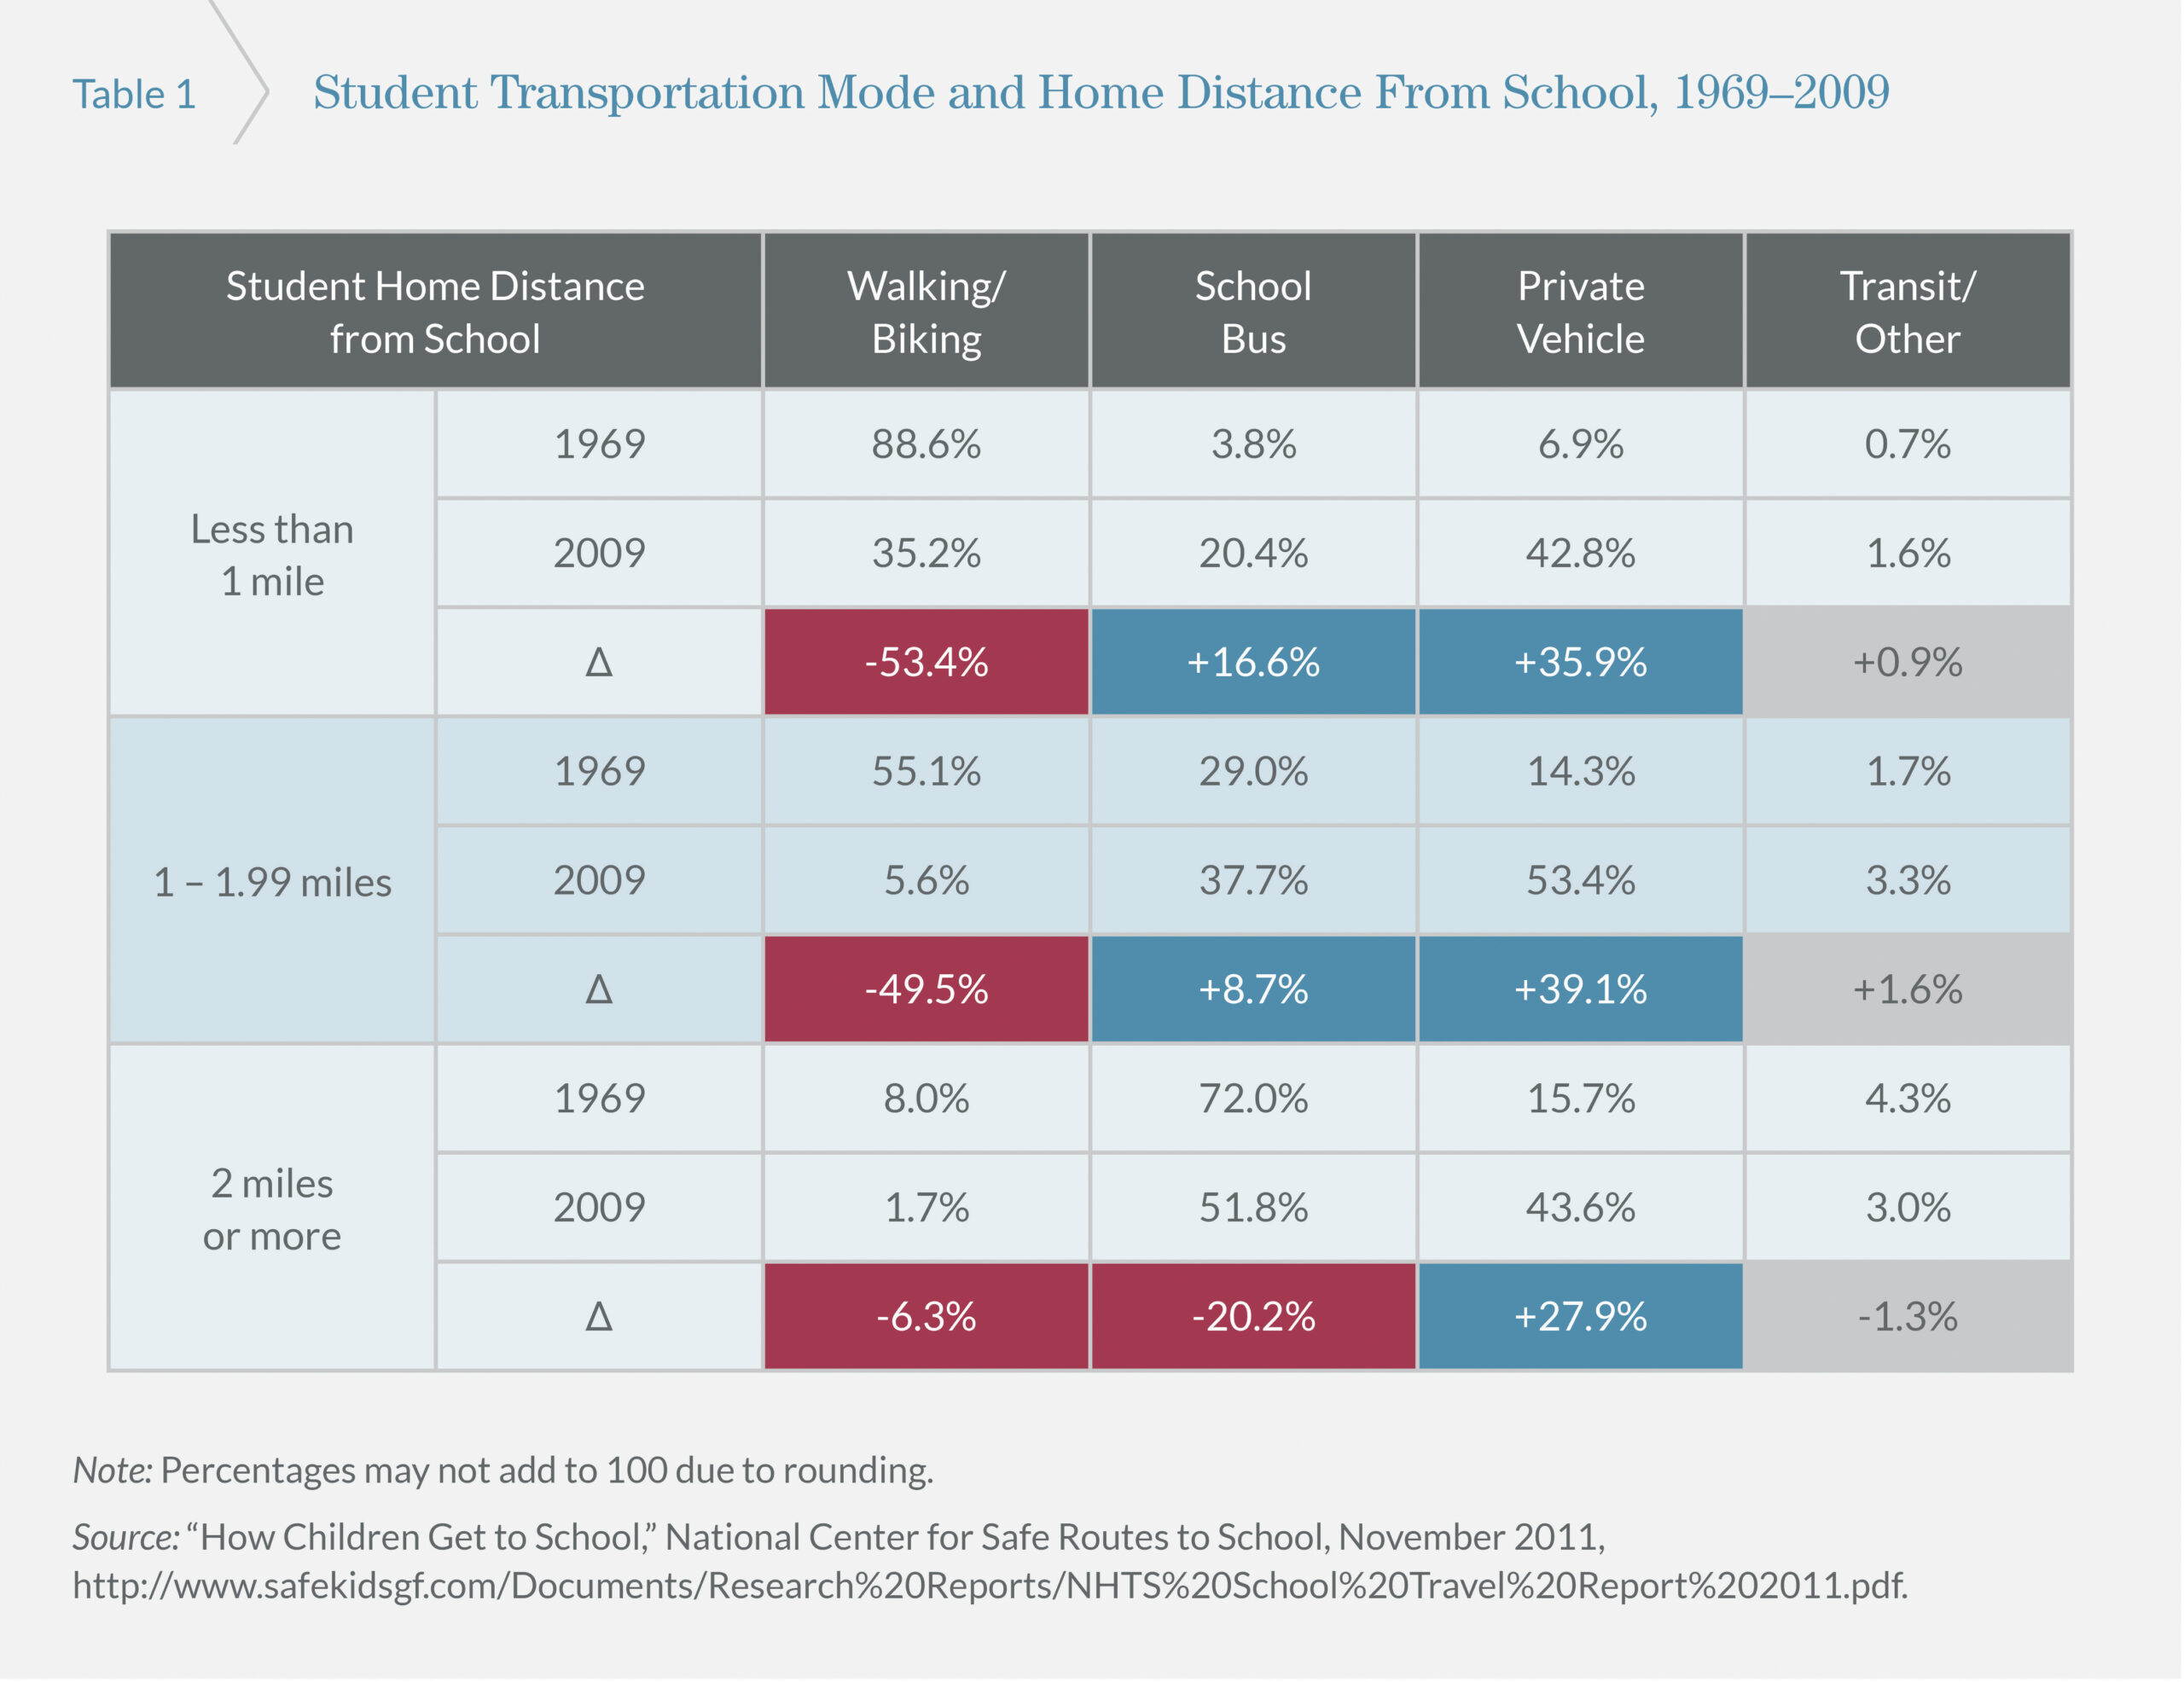 Table showing rates of walking and biking to school by distance from home to school.